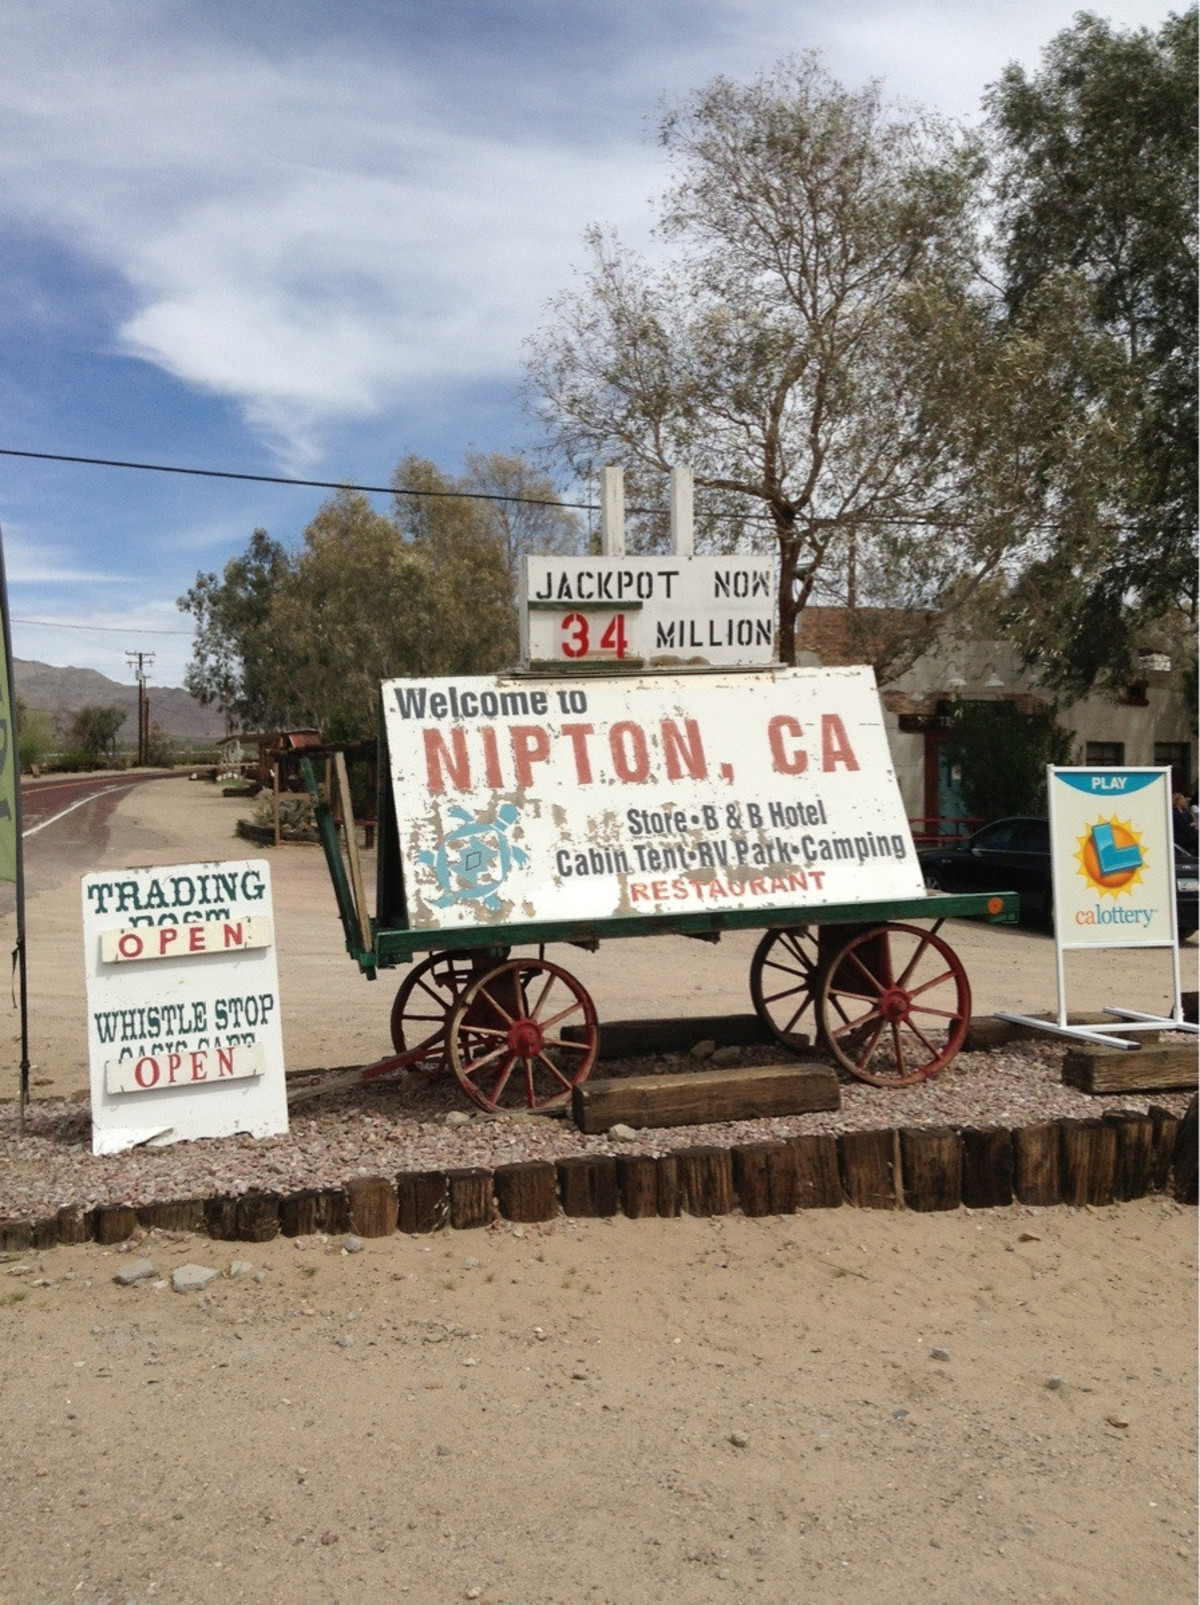 fallout new vegas real life locations